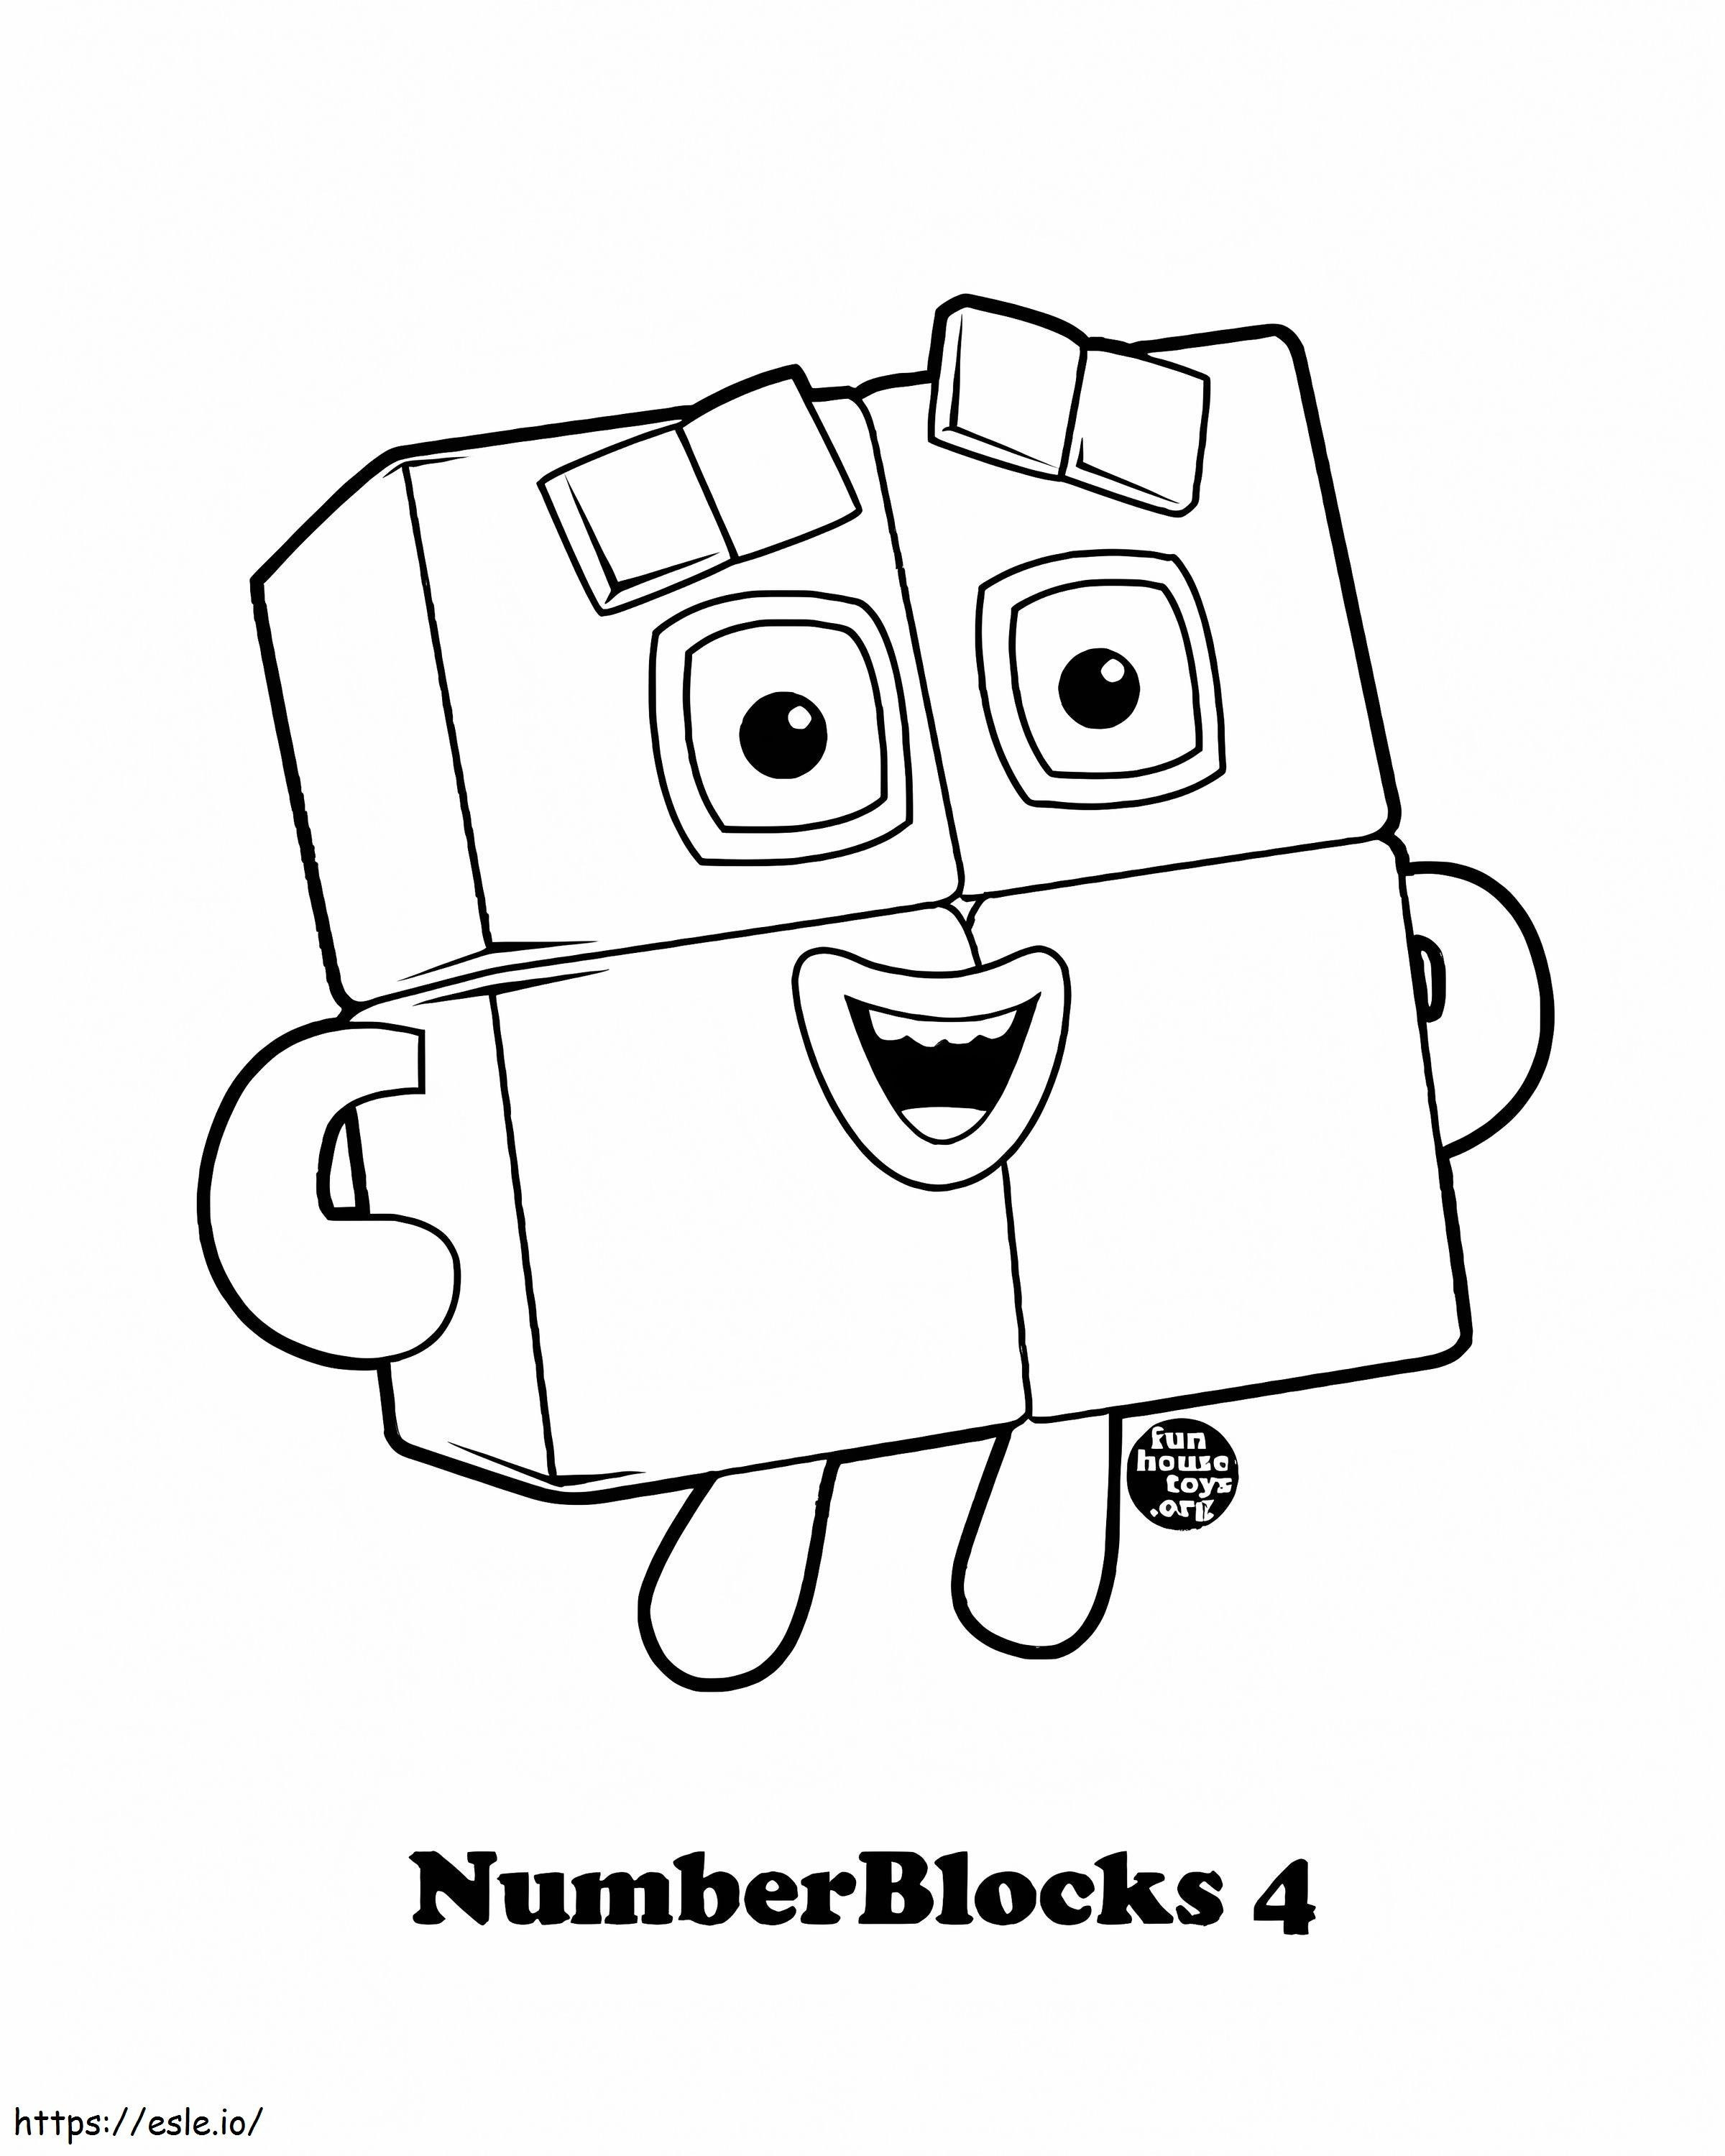 Number Blocks 4 coloring page